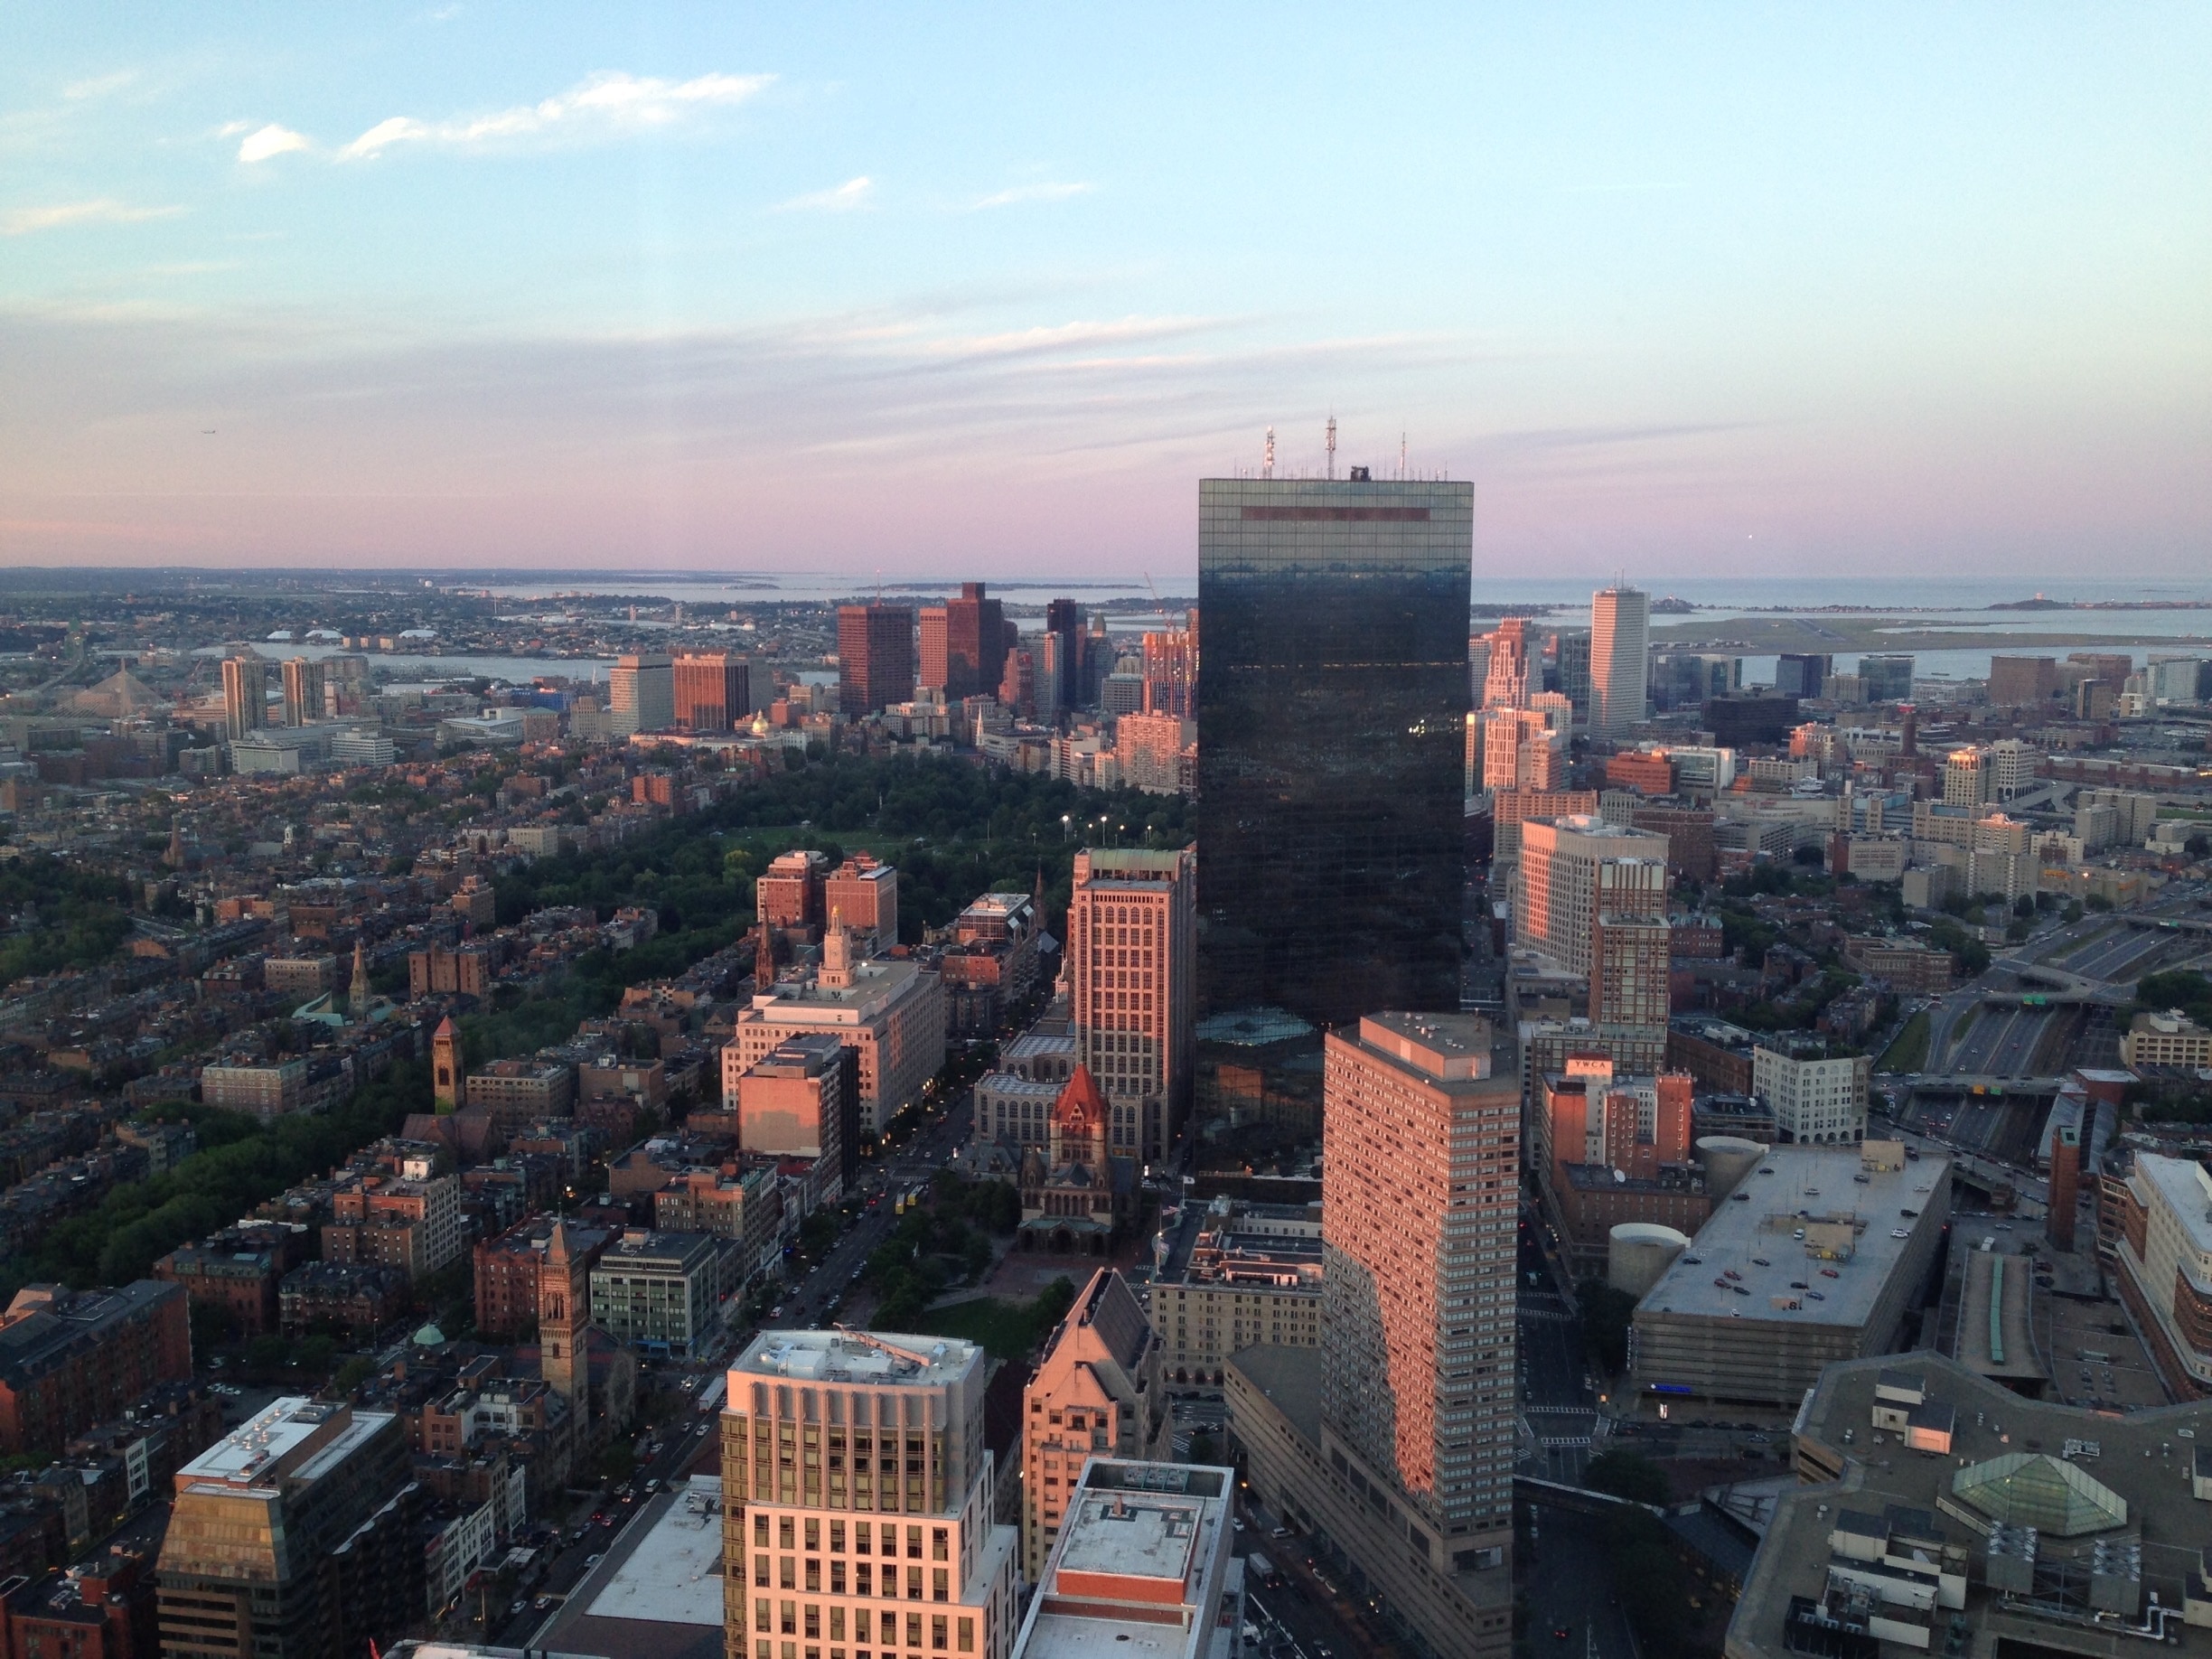 Skyline from Copley Place
#Sunsets #Boston